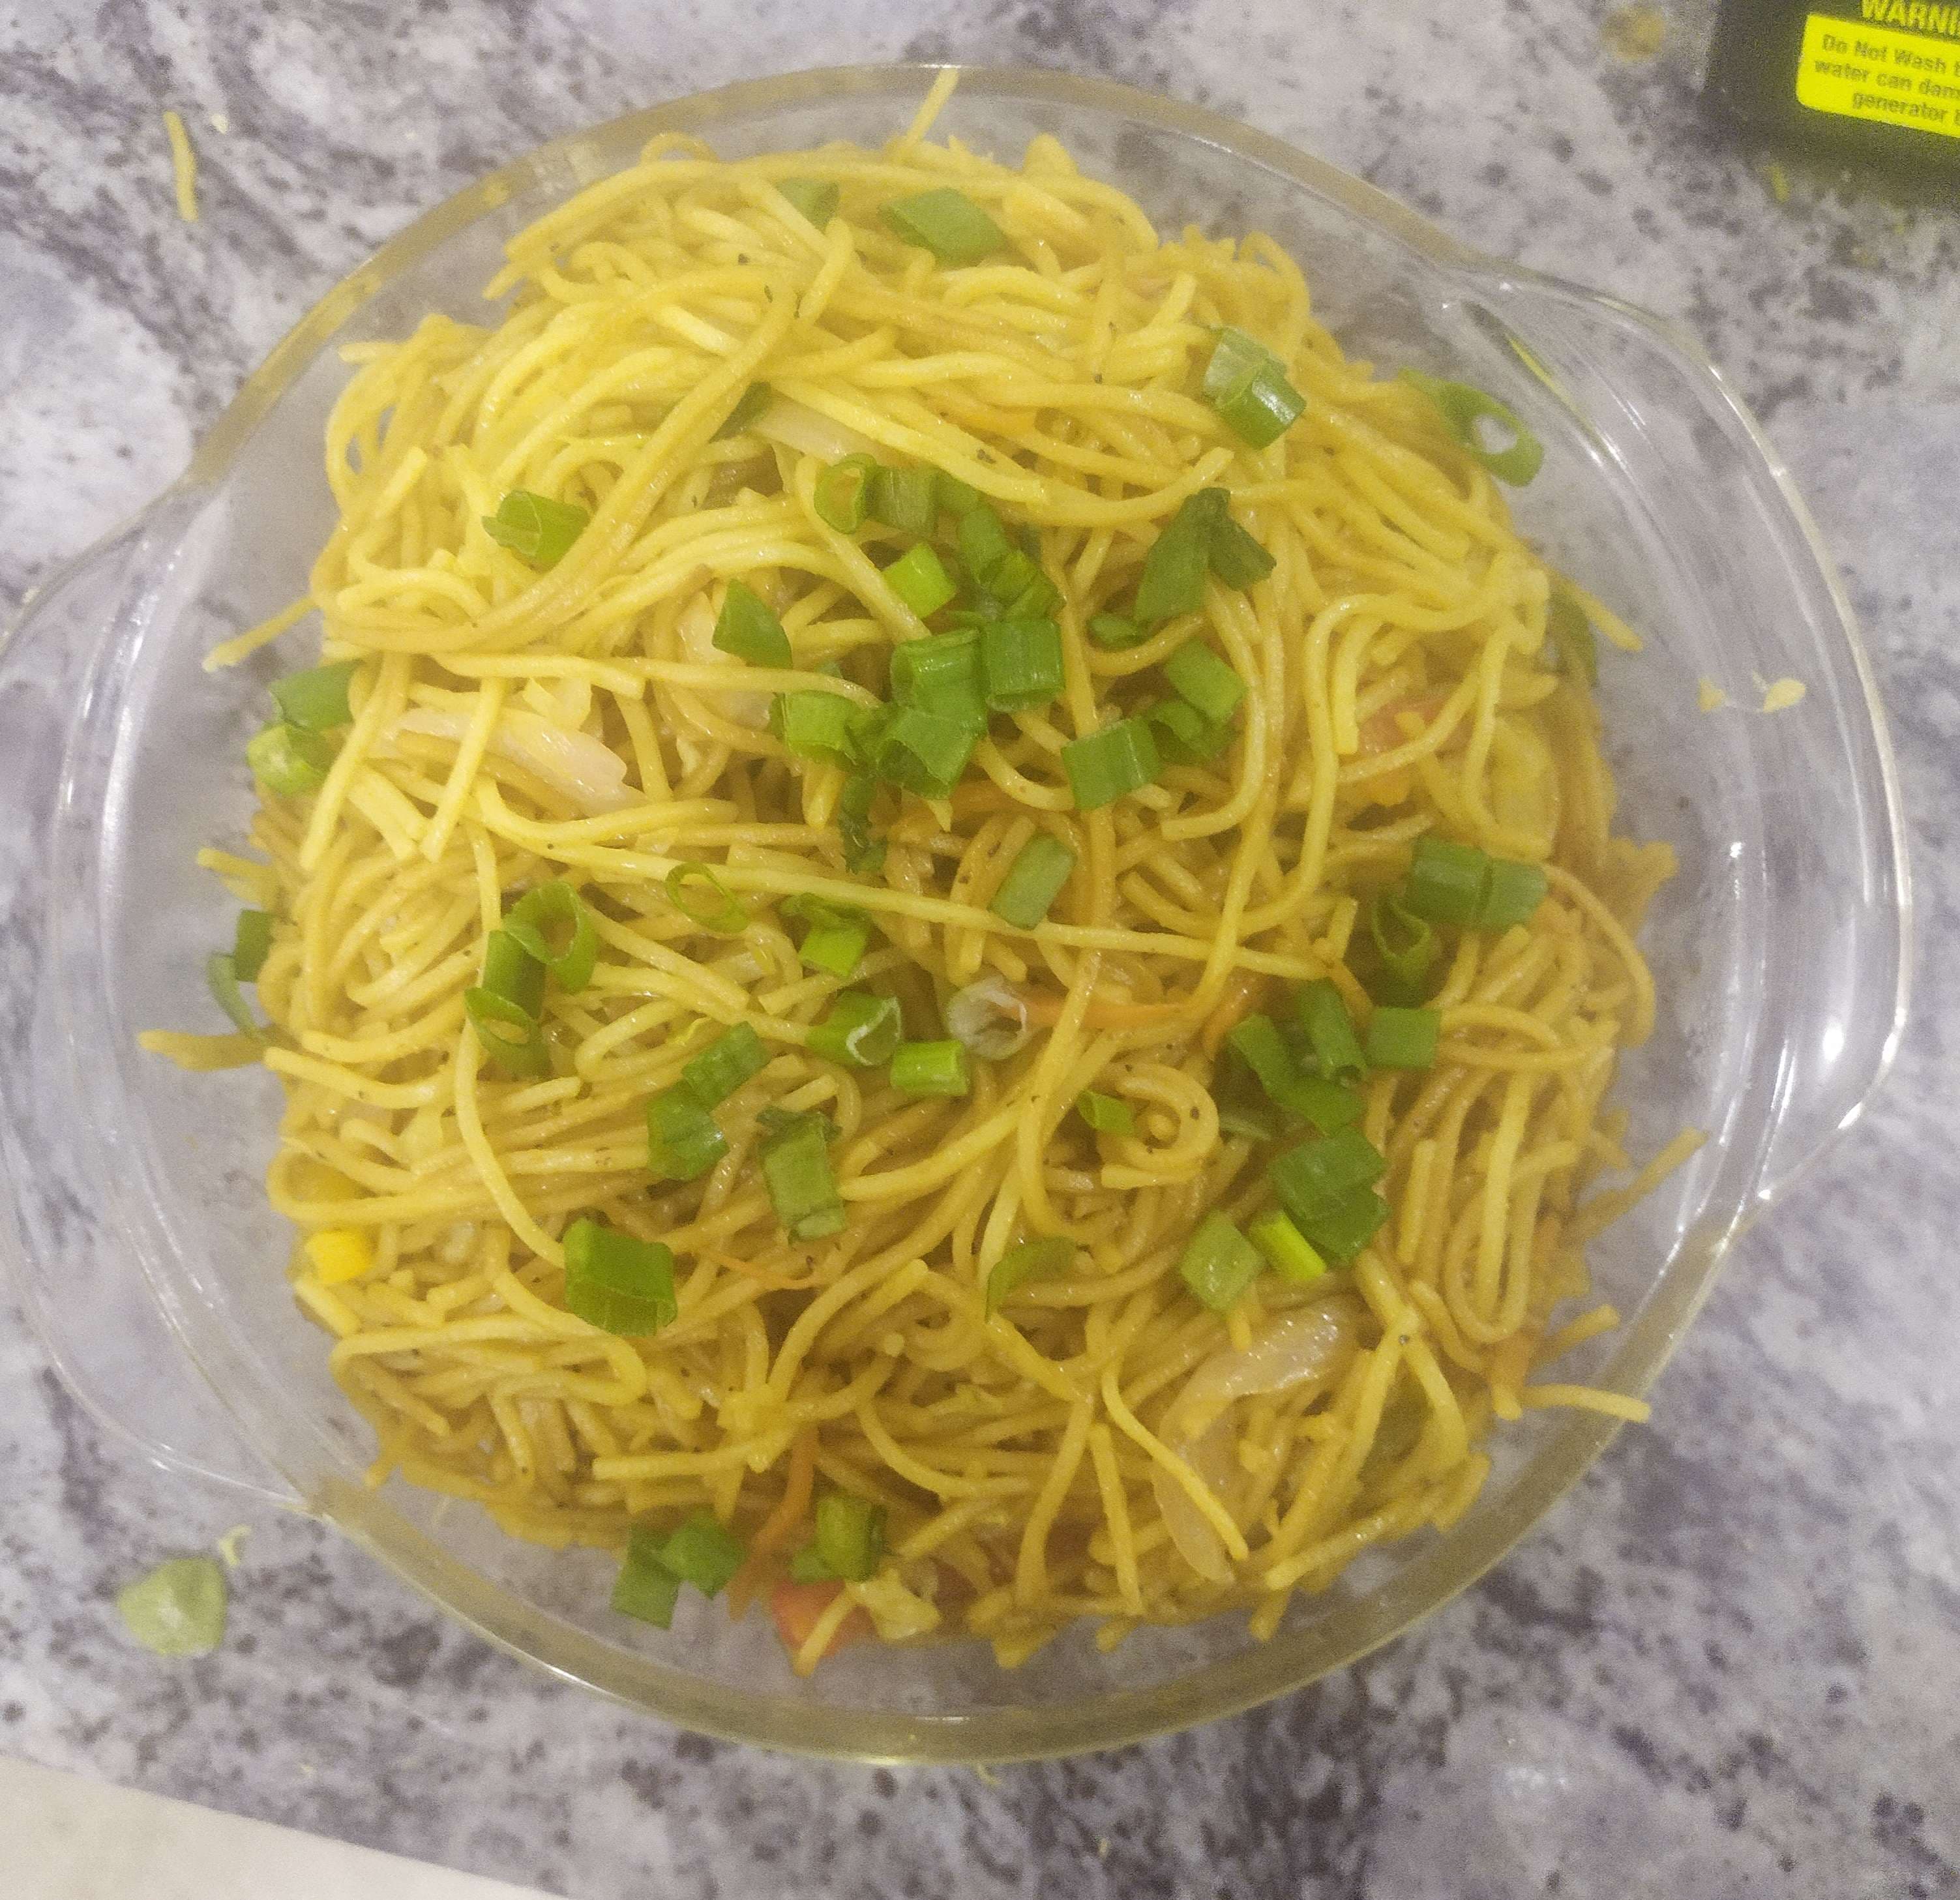 Delicious Chilly Garlic Noodles prepared by COOX